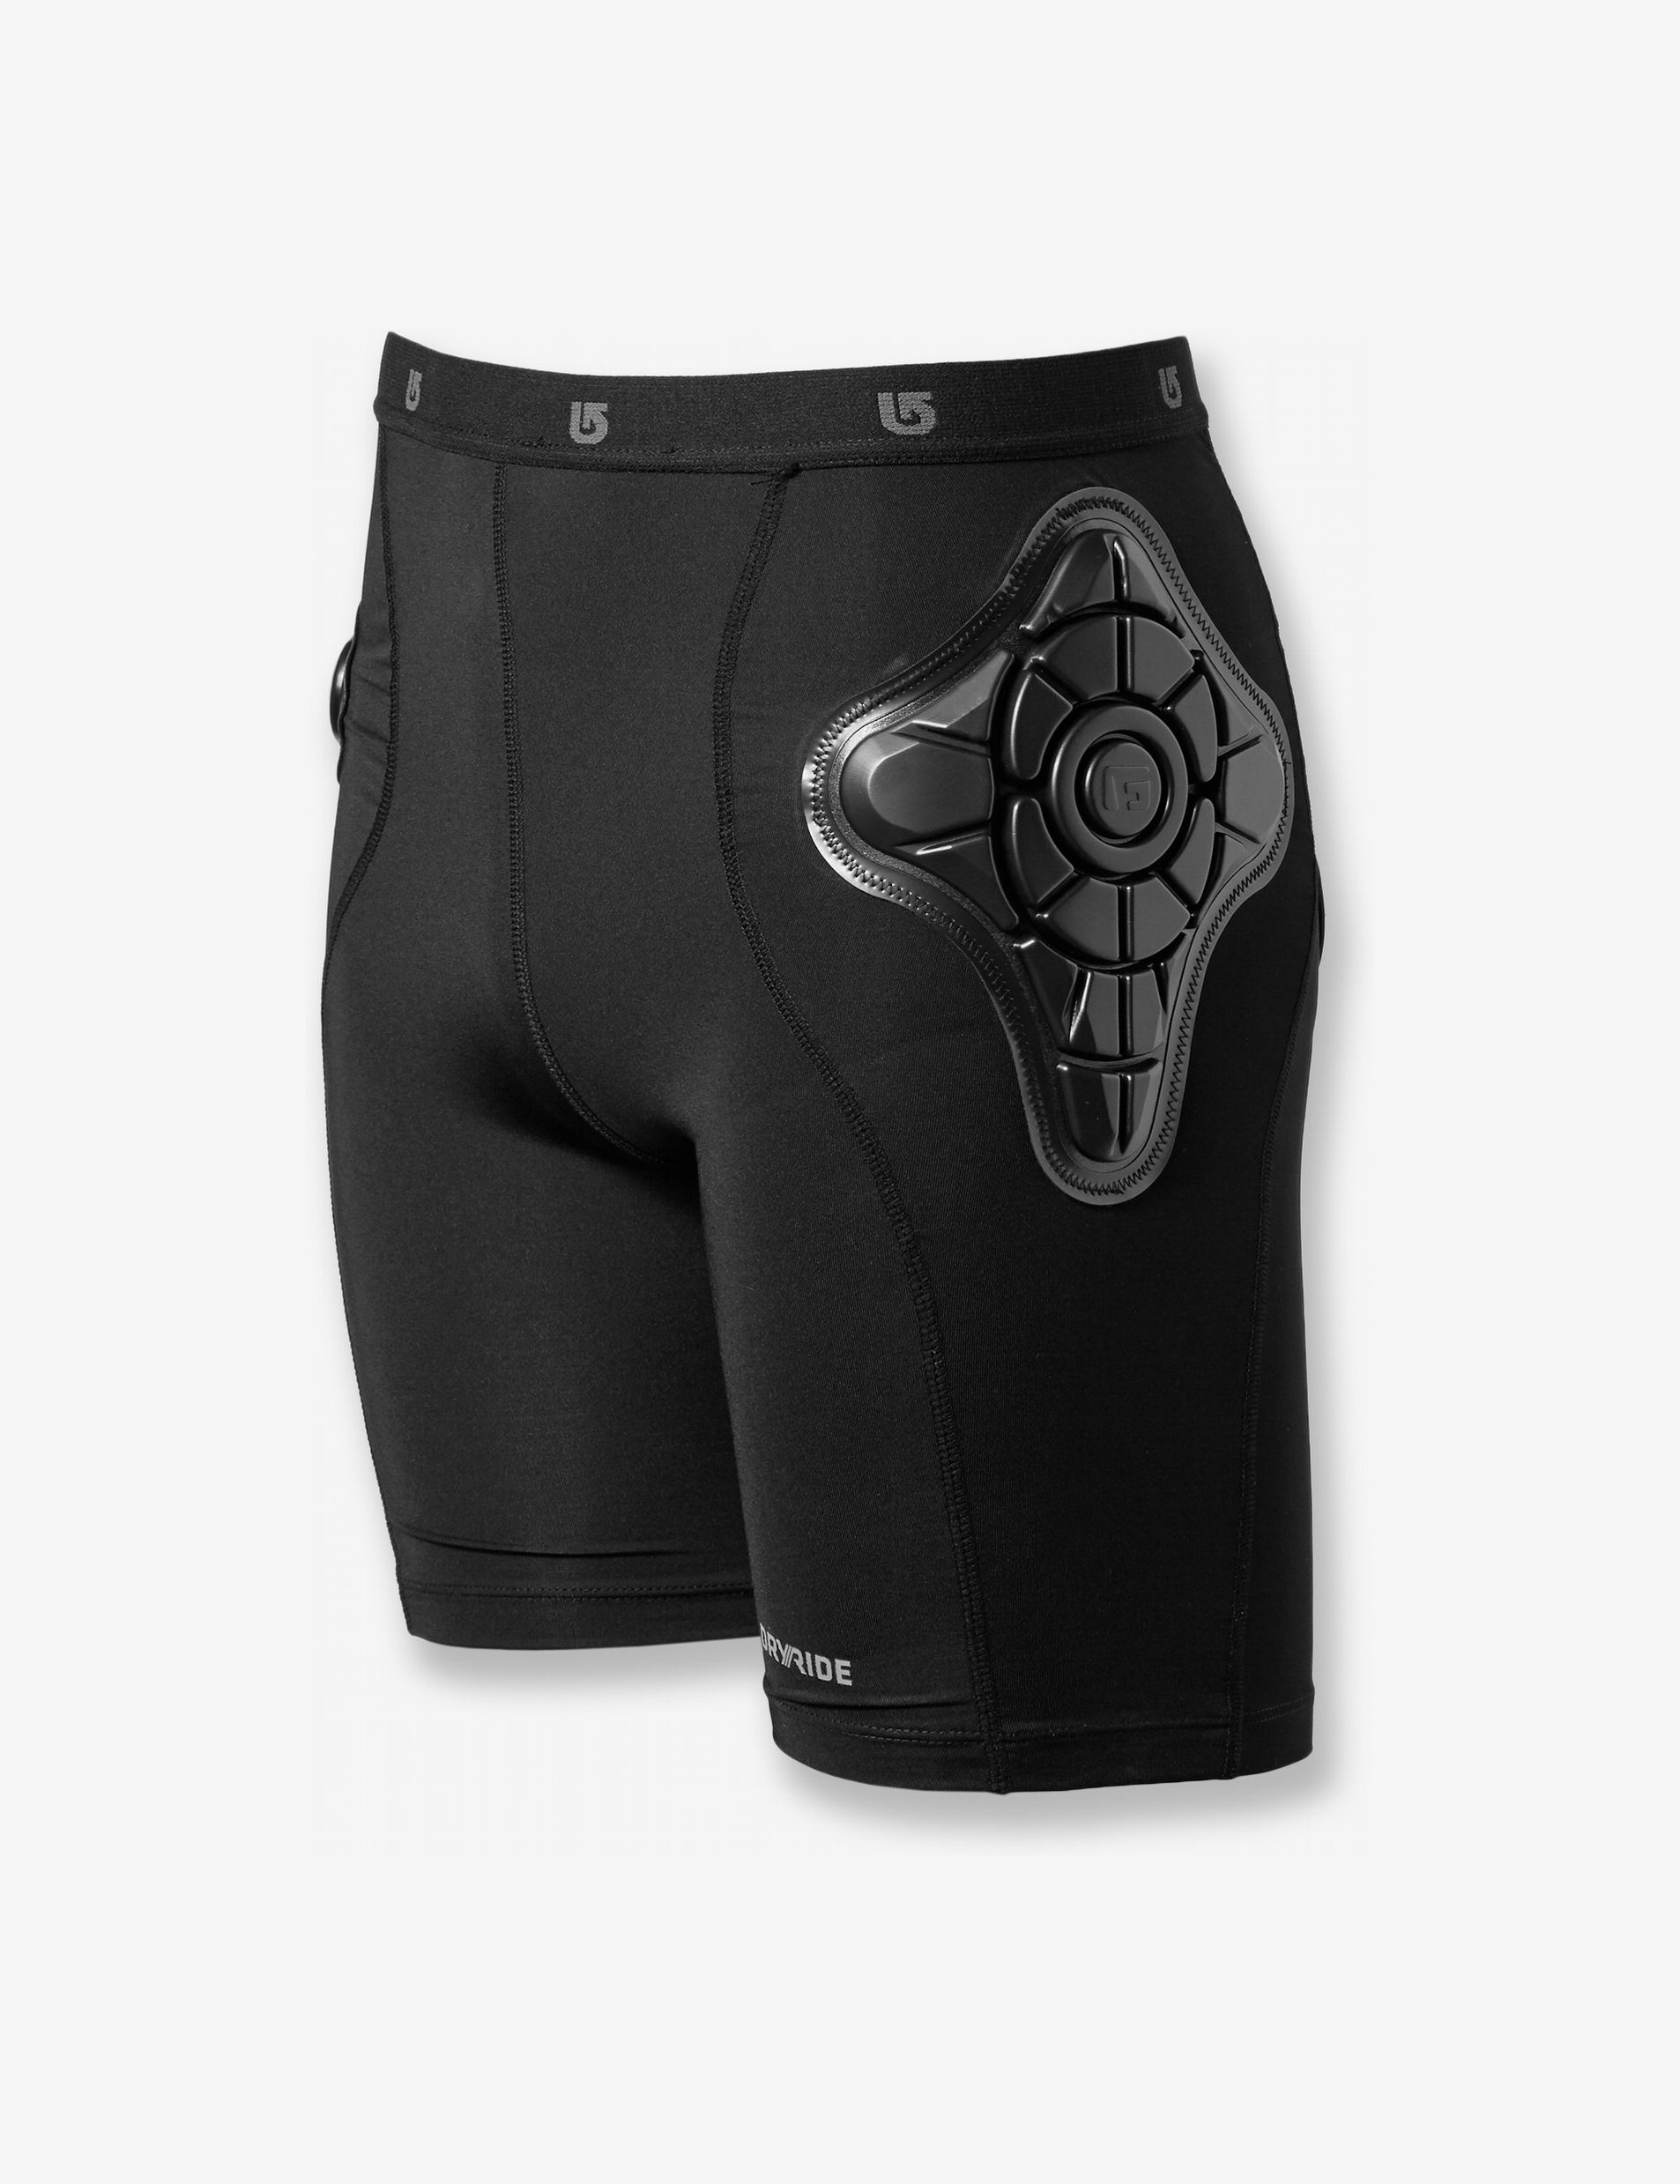 10 Best Impact Shorts for Skiers and Snowboarders 2022 | The Strategist